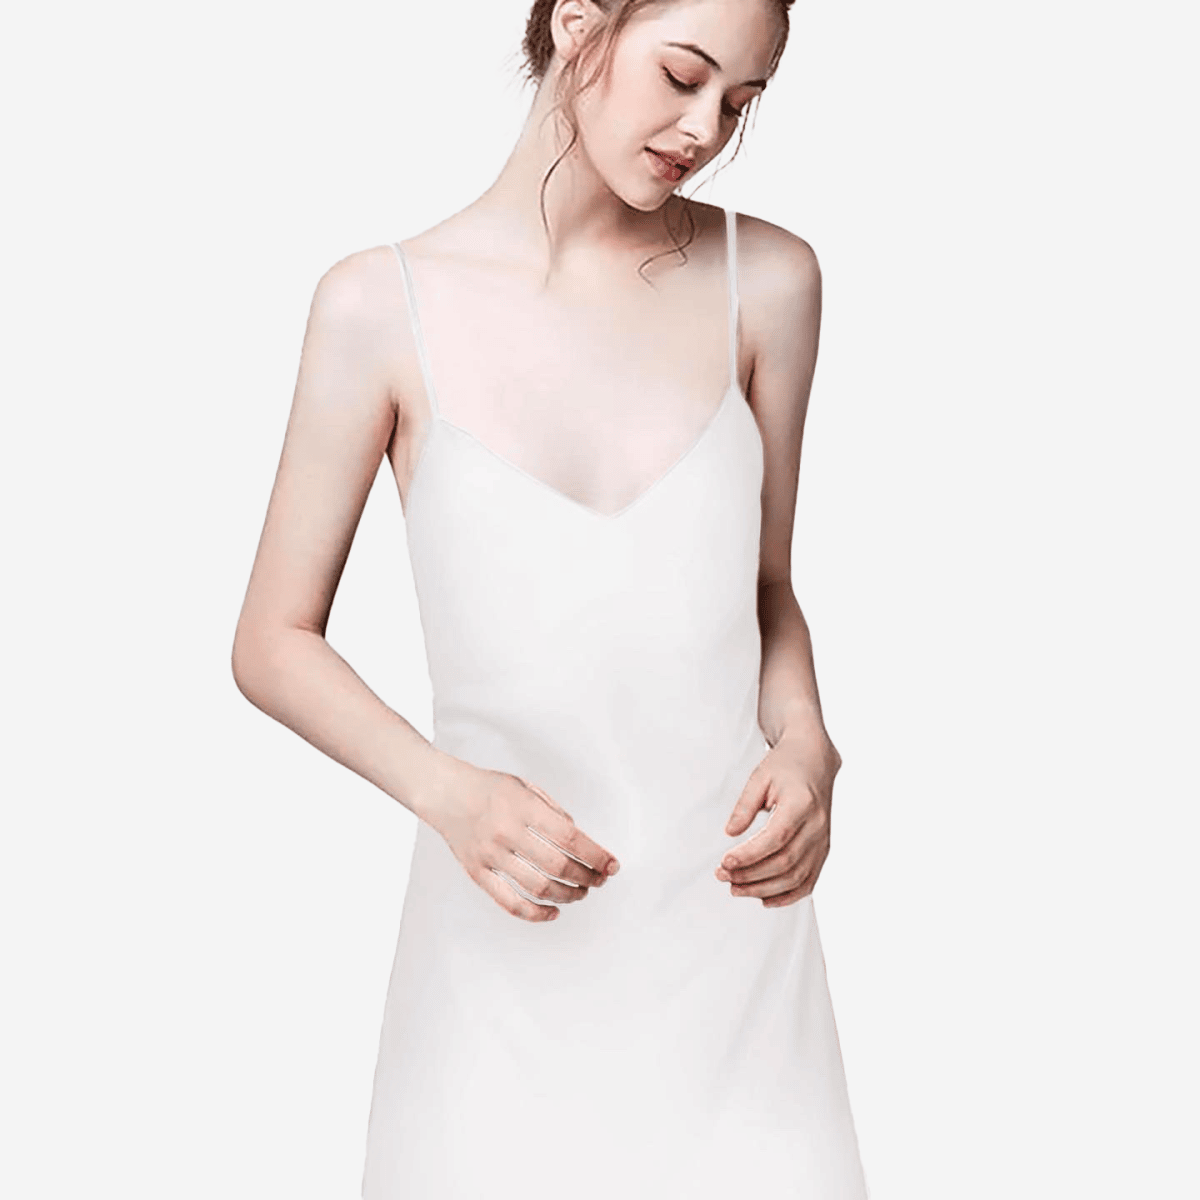 Care for Your Silk Slip Dress with Ease - Dry Clean or Cool Hand Wash with Gentle Detergent. No Bleach, Fabric Softener, Tumble Dry or Wringing. Line Dry in Shade and Cool Iron Without Steam for Best Results.